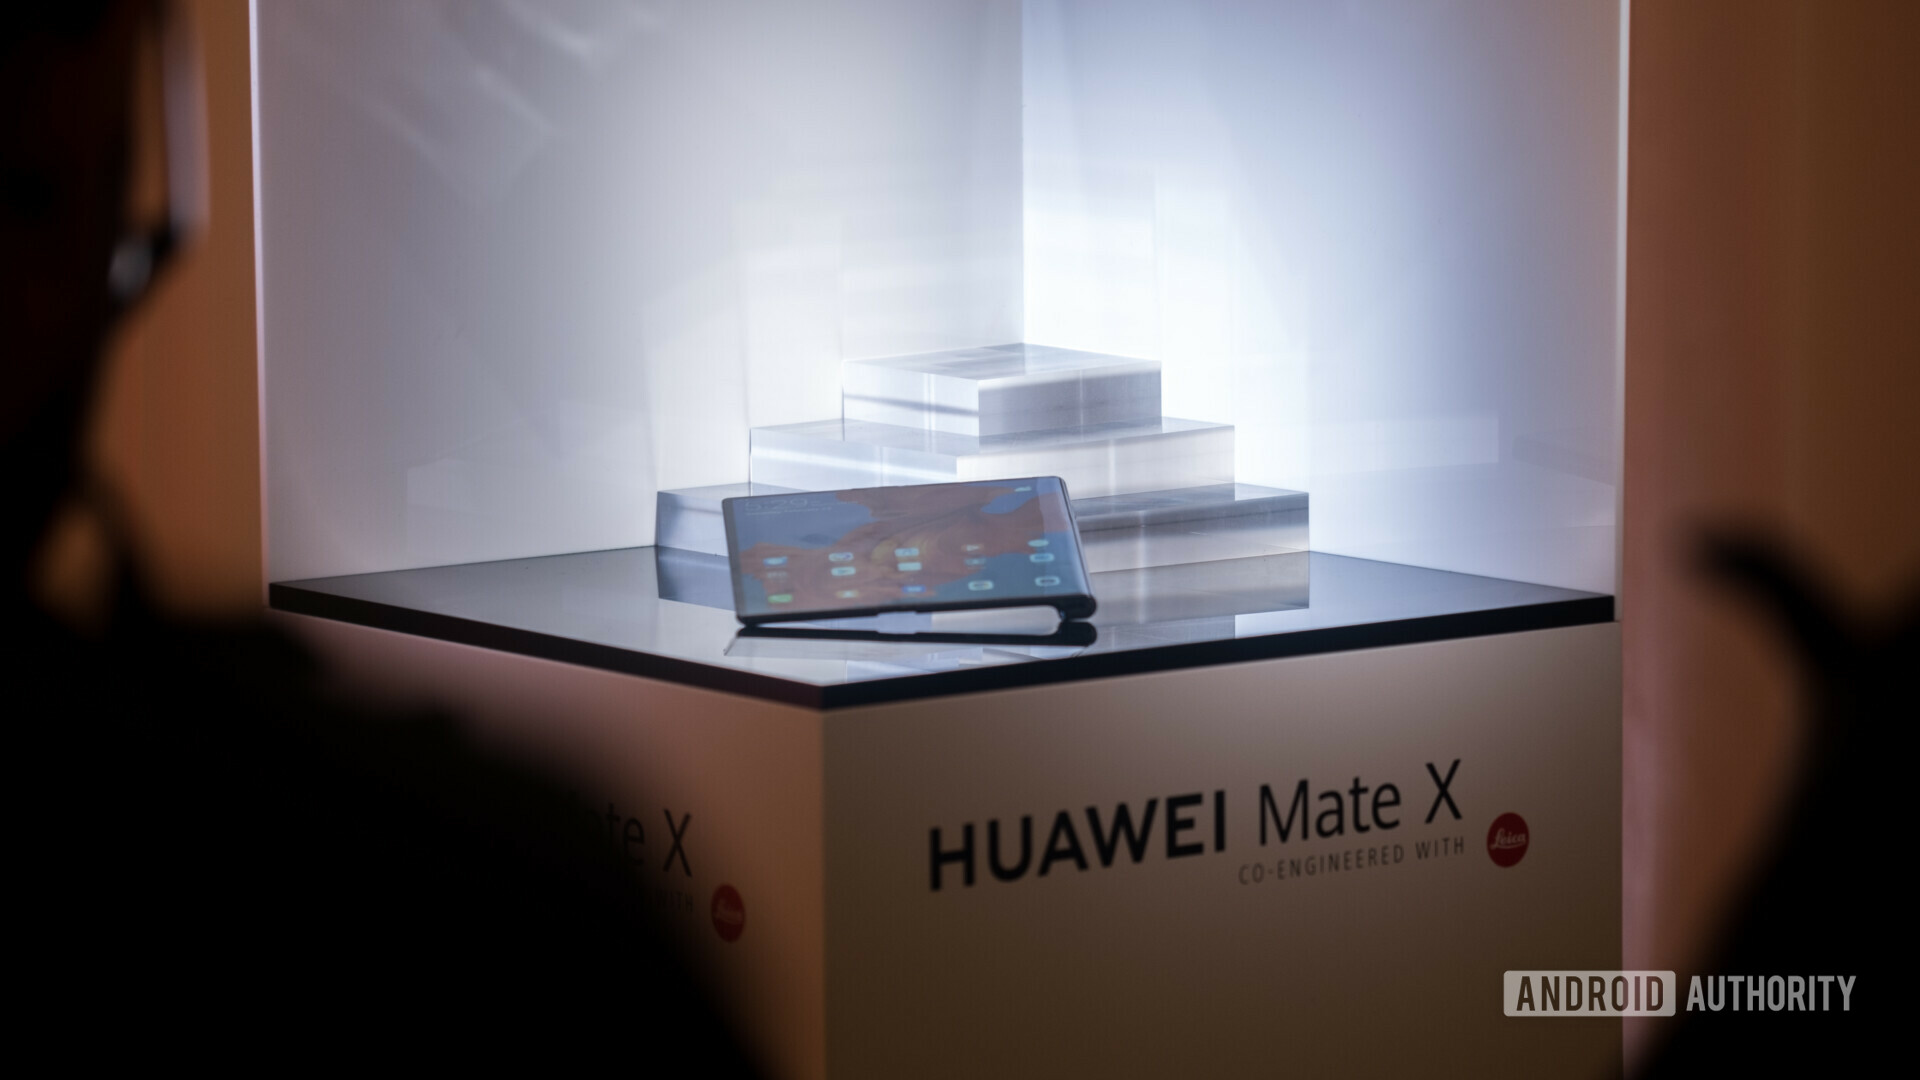 Huawei Mate X in a tablet mode showcased at MWC 2019